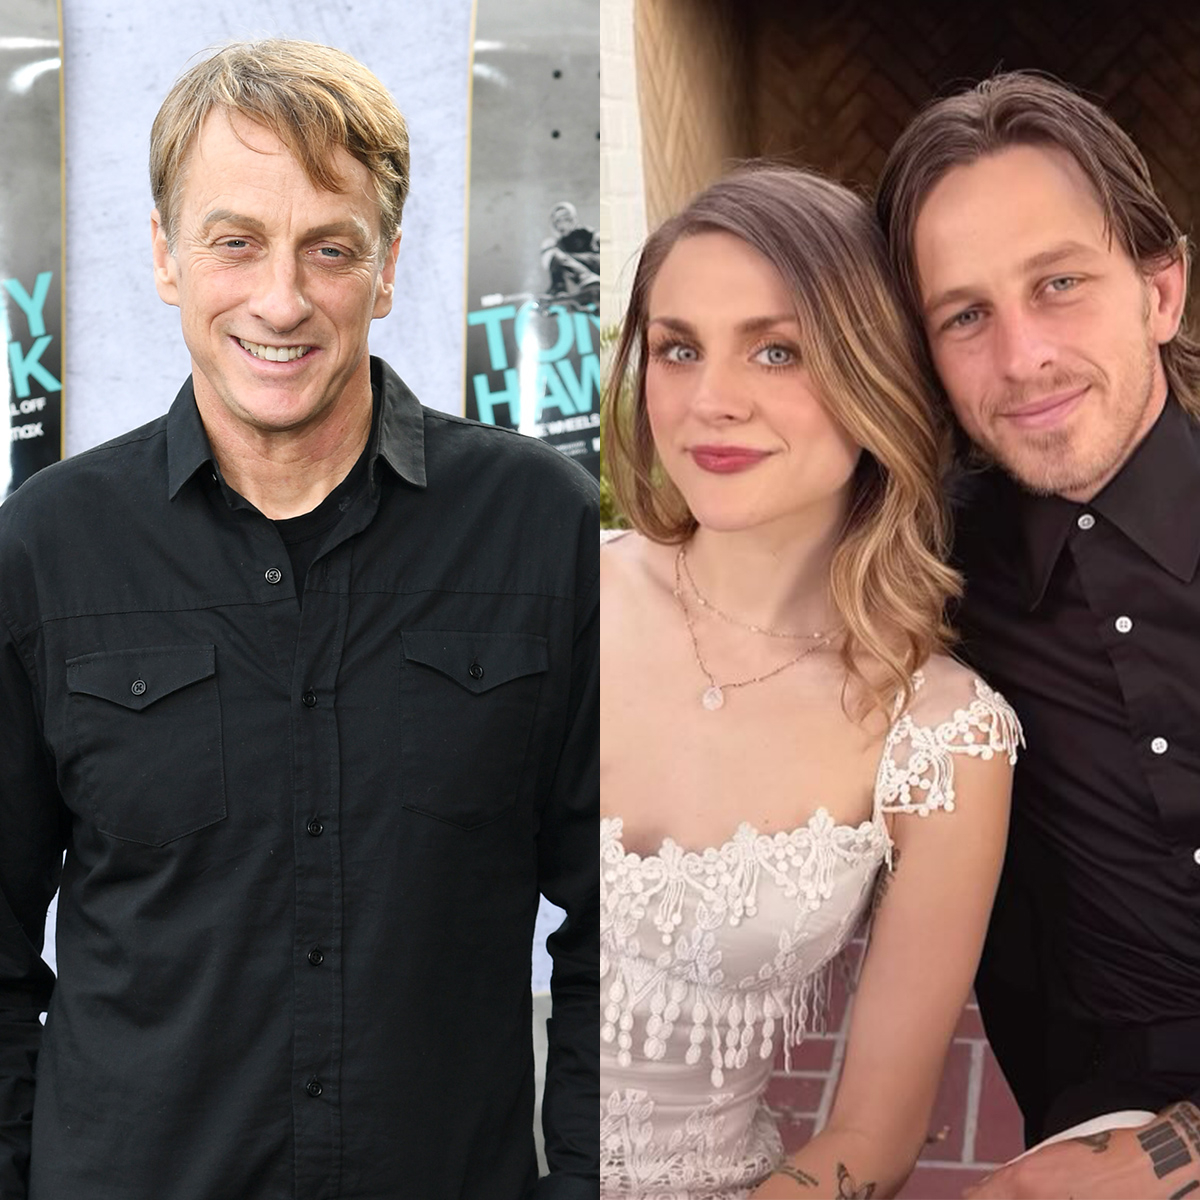 Tony Hawk shares first photo from son Riley's wedding to Frances